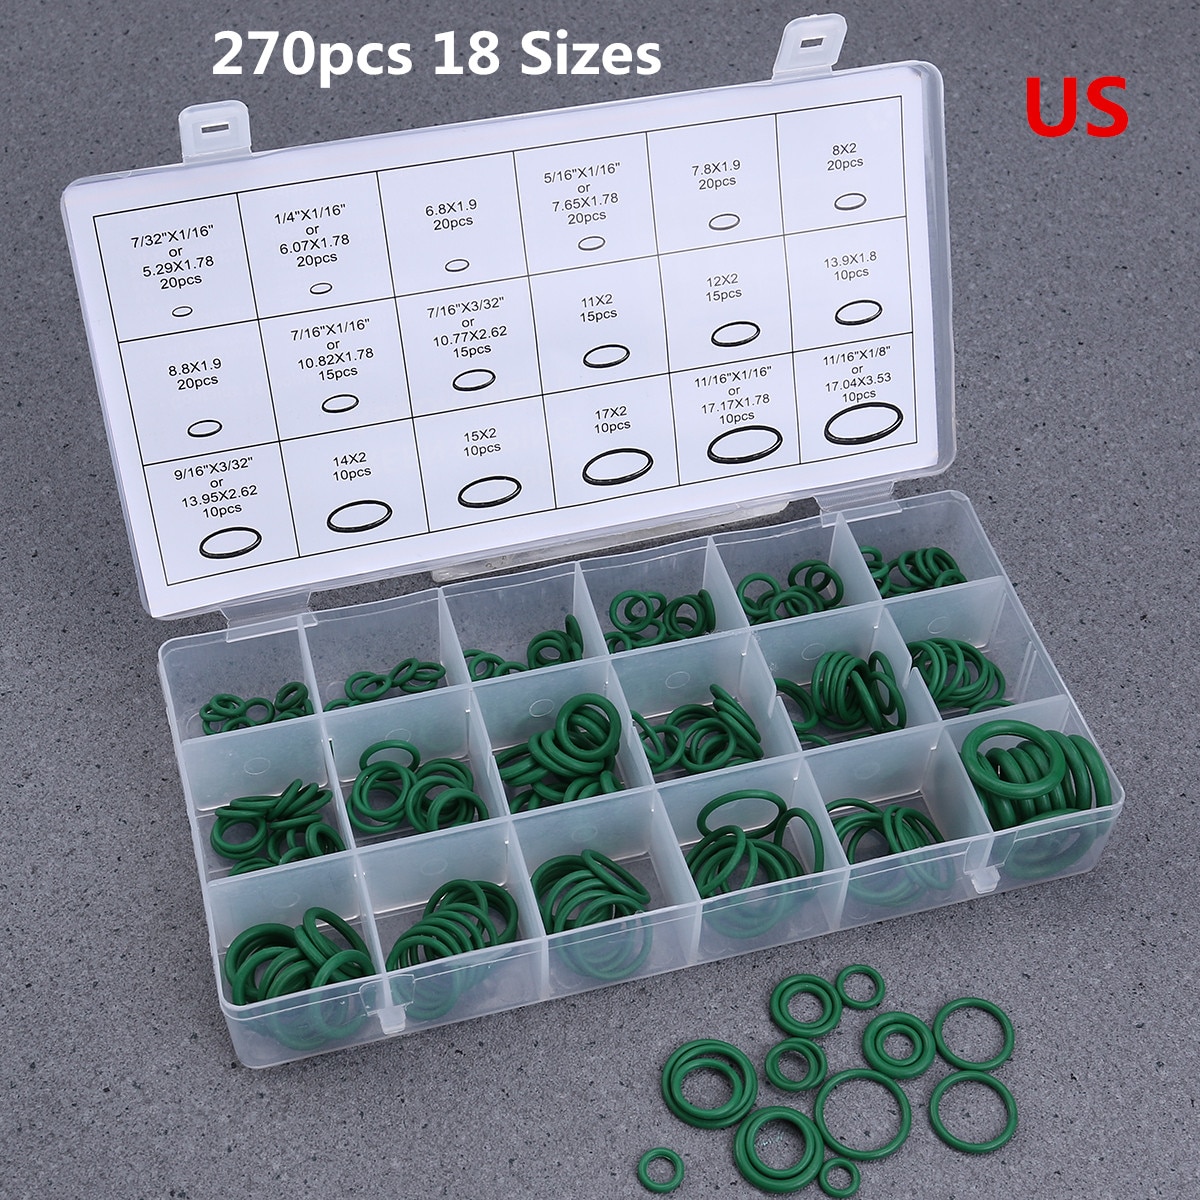 270pcs 18 Sizes O Ring Rubber Insulation Gasket Washer Seals Tool Car Air Conditioning Compressor Seals Car Repair tools A20